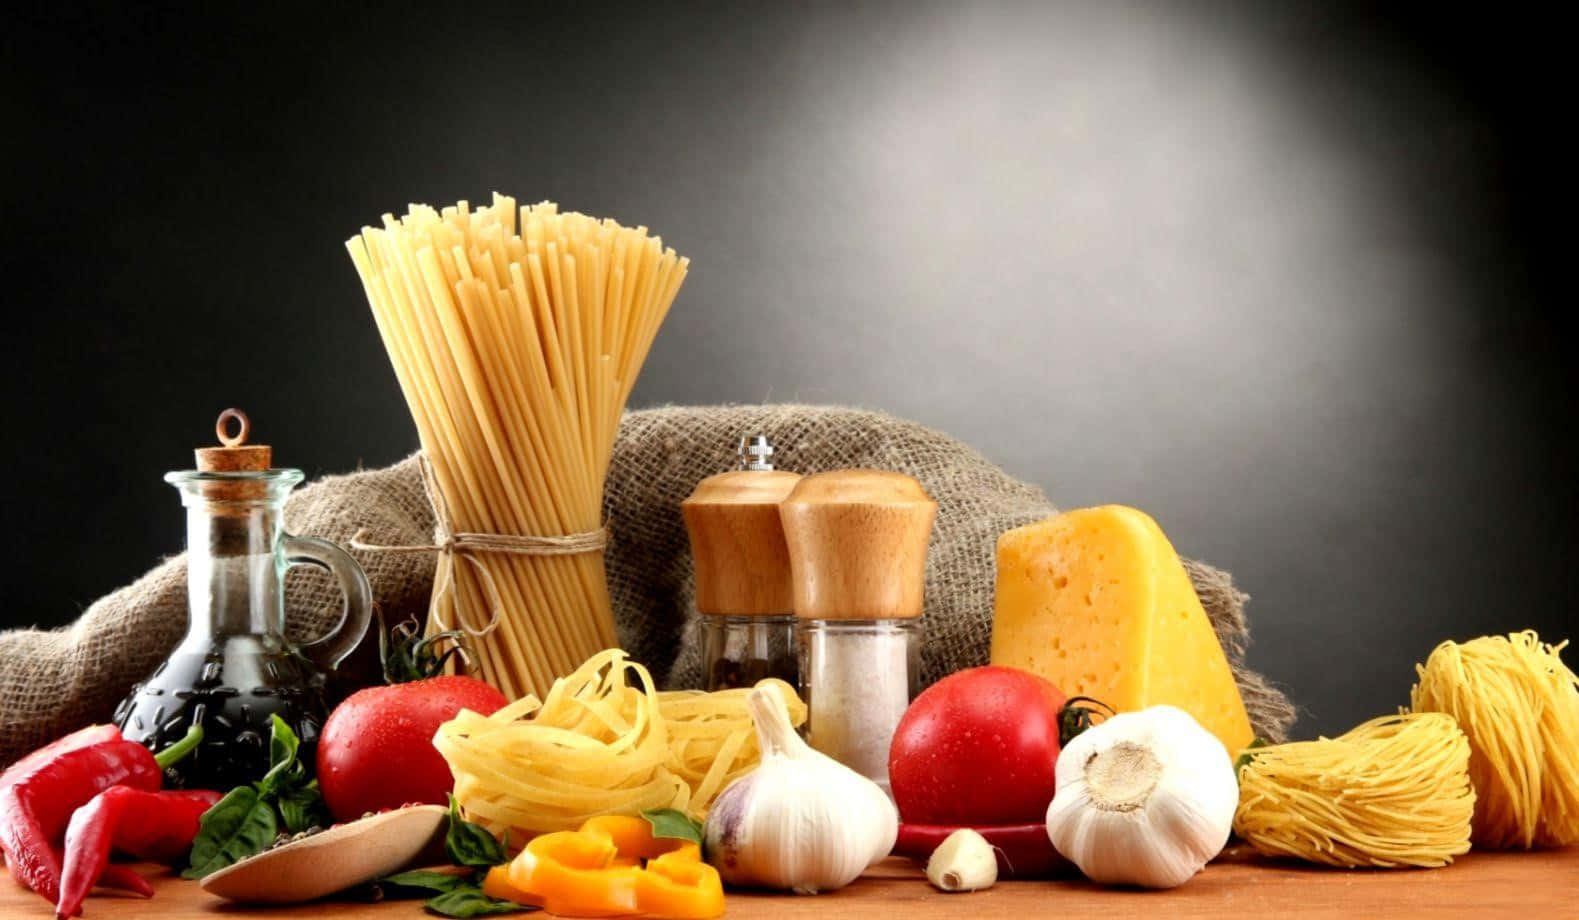 A Variety Of Pasta, Vegetables And Spices On A Table